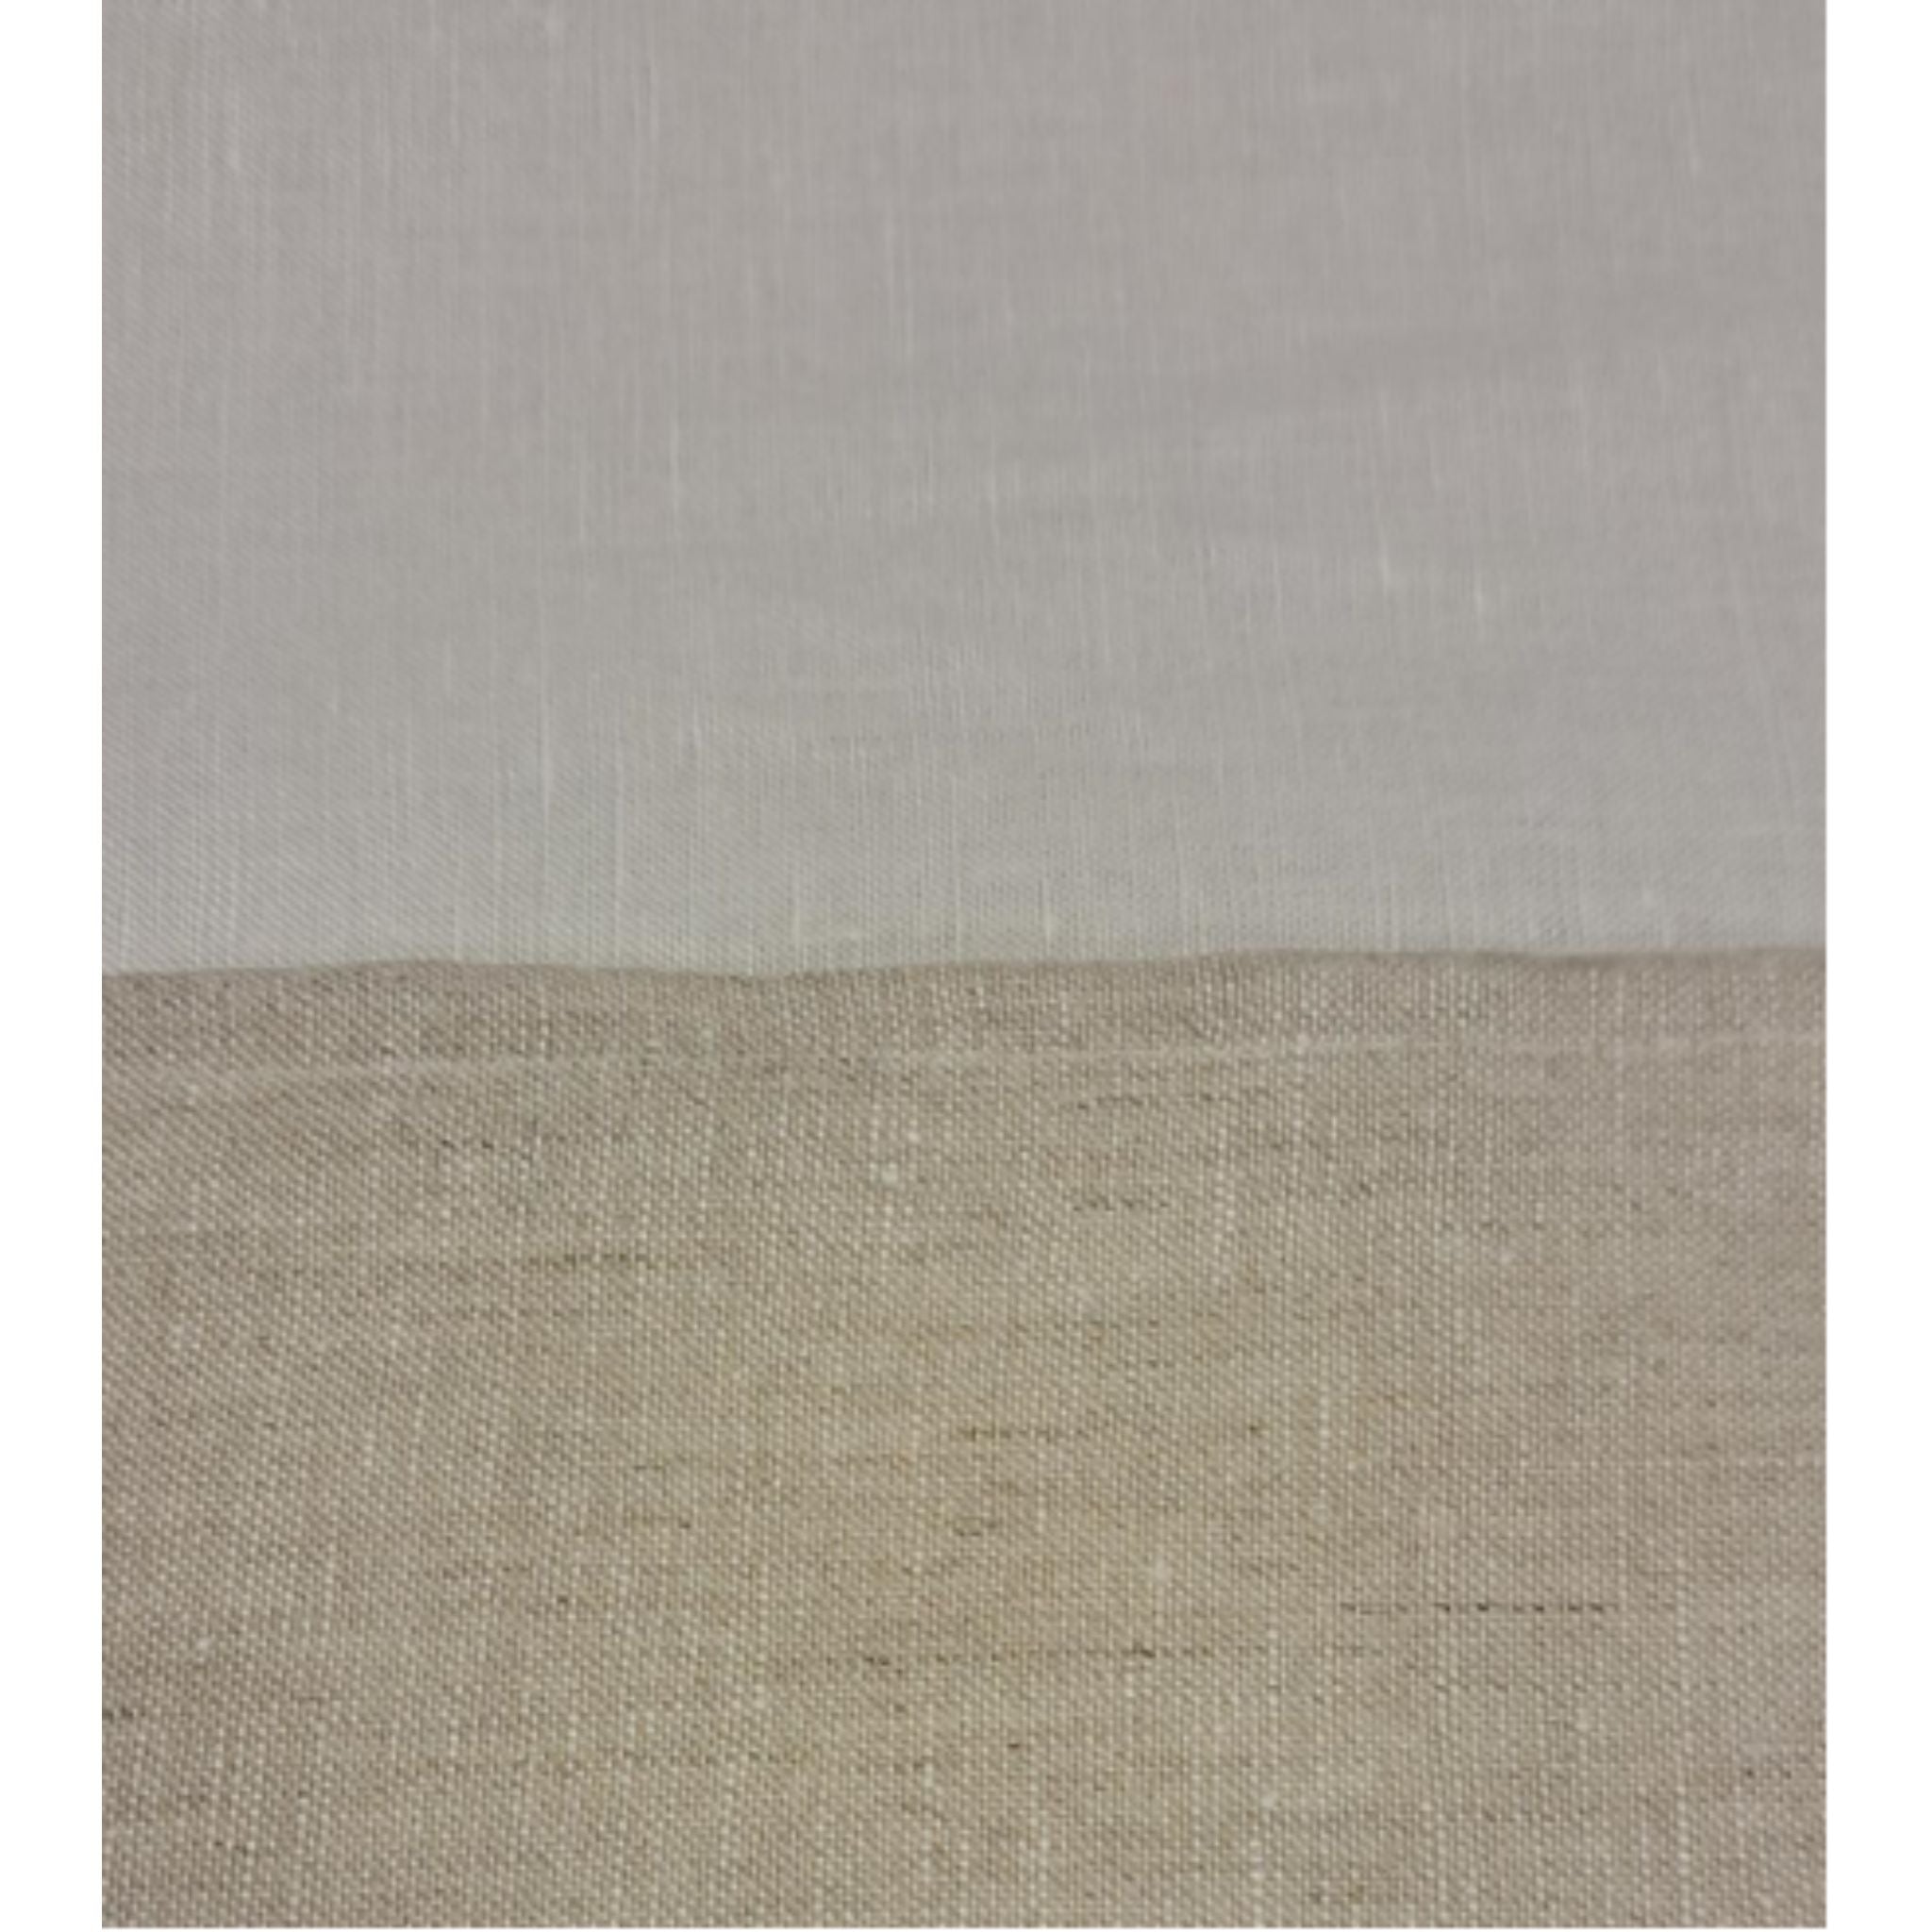 Linen cloth with ribbons - 0